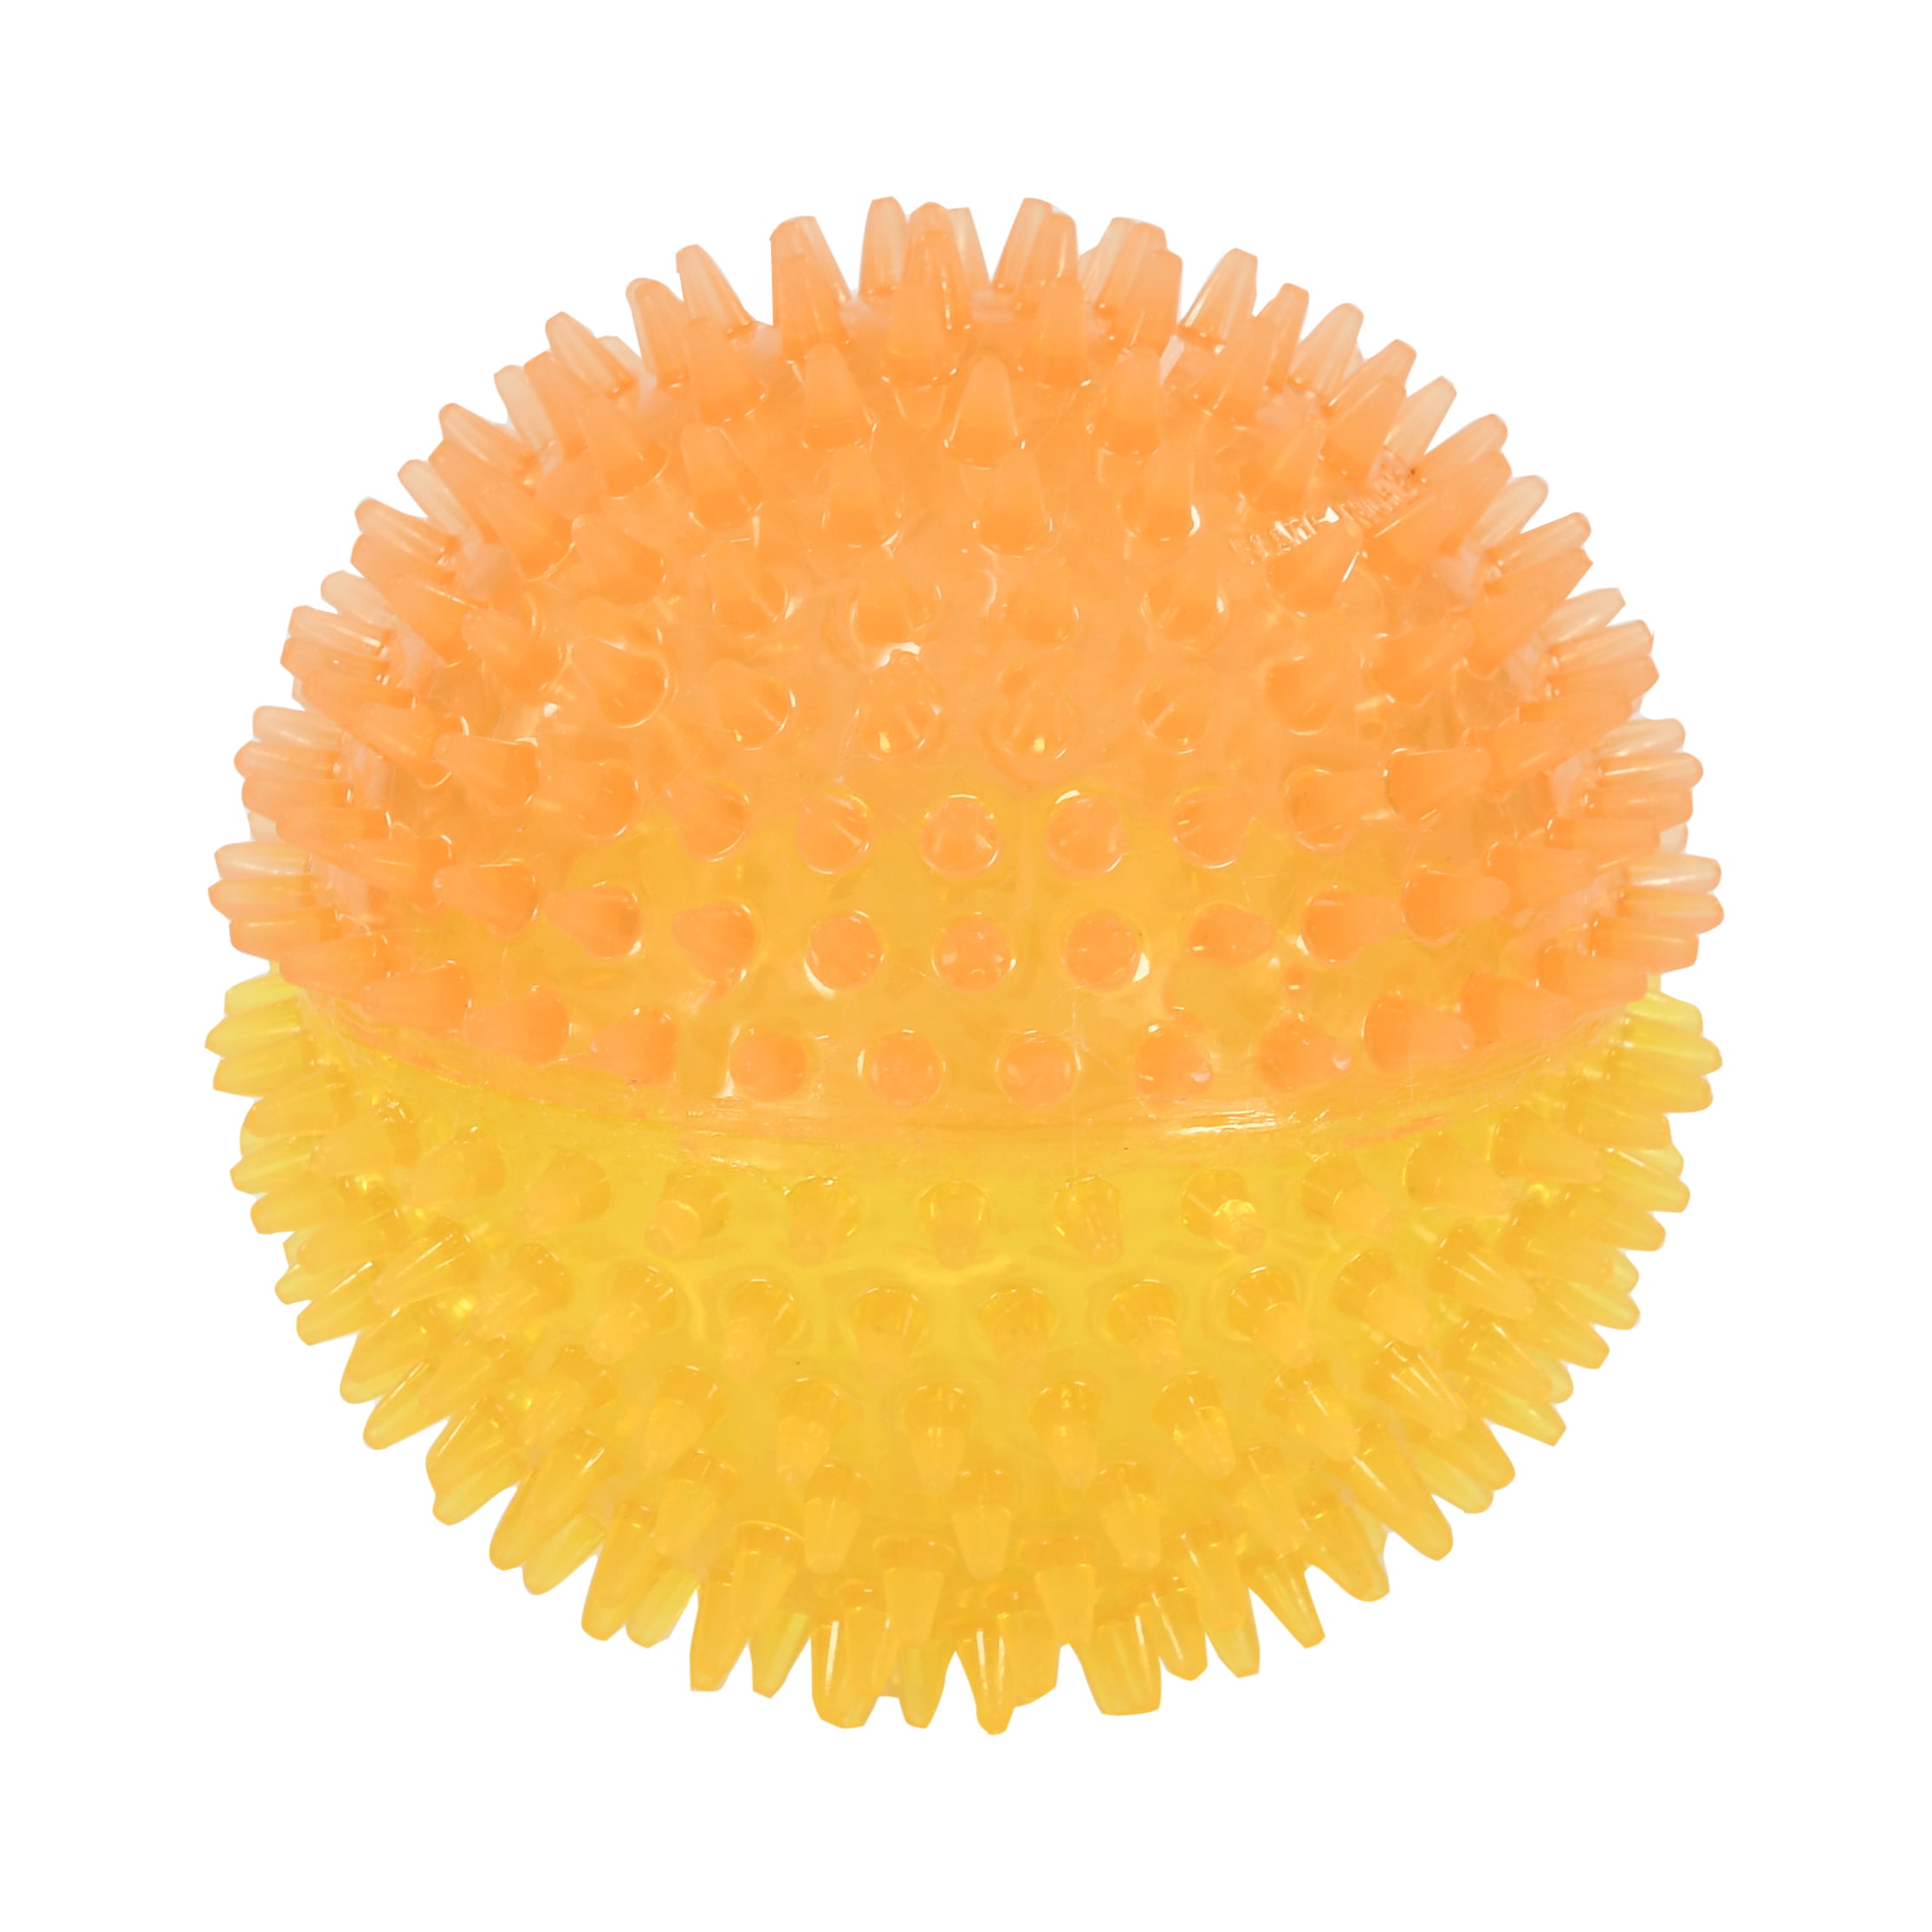 spiky ball toy